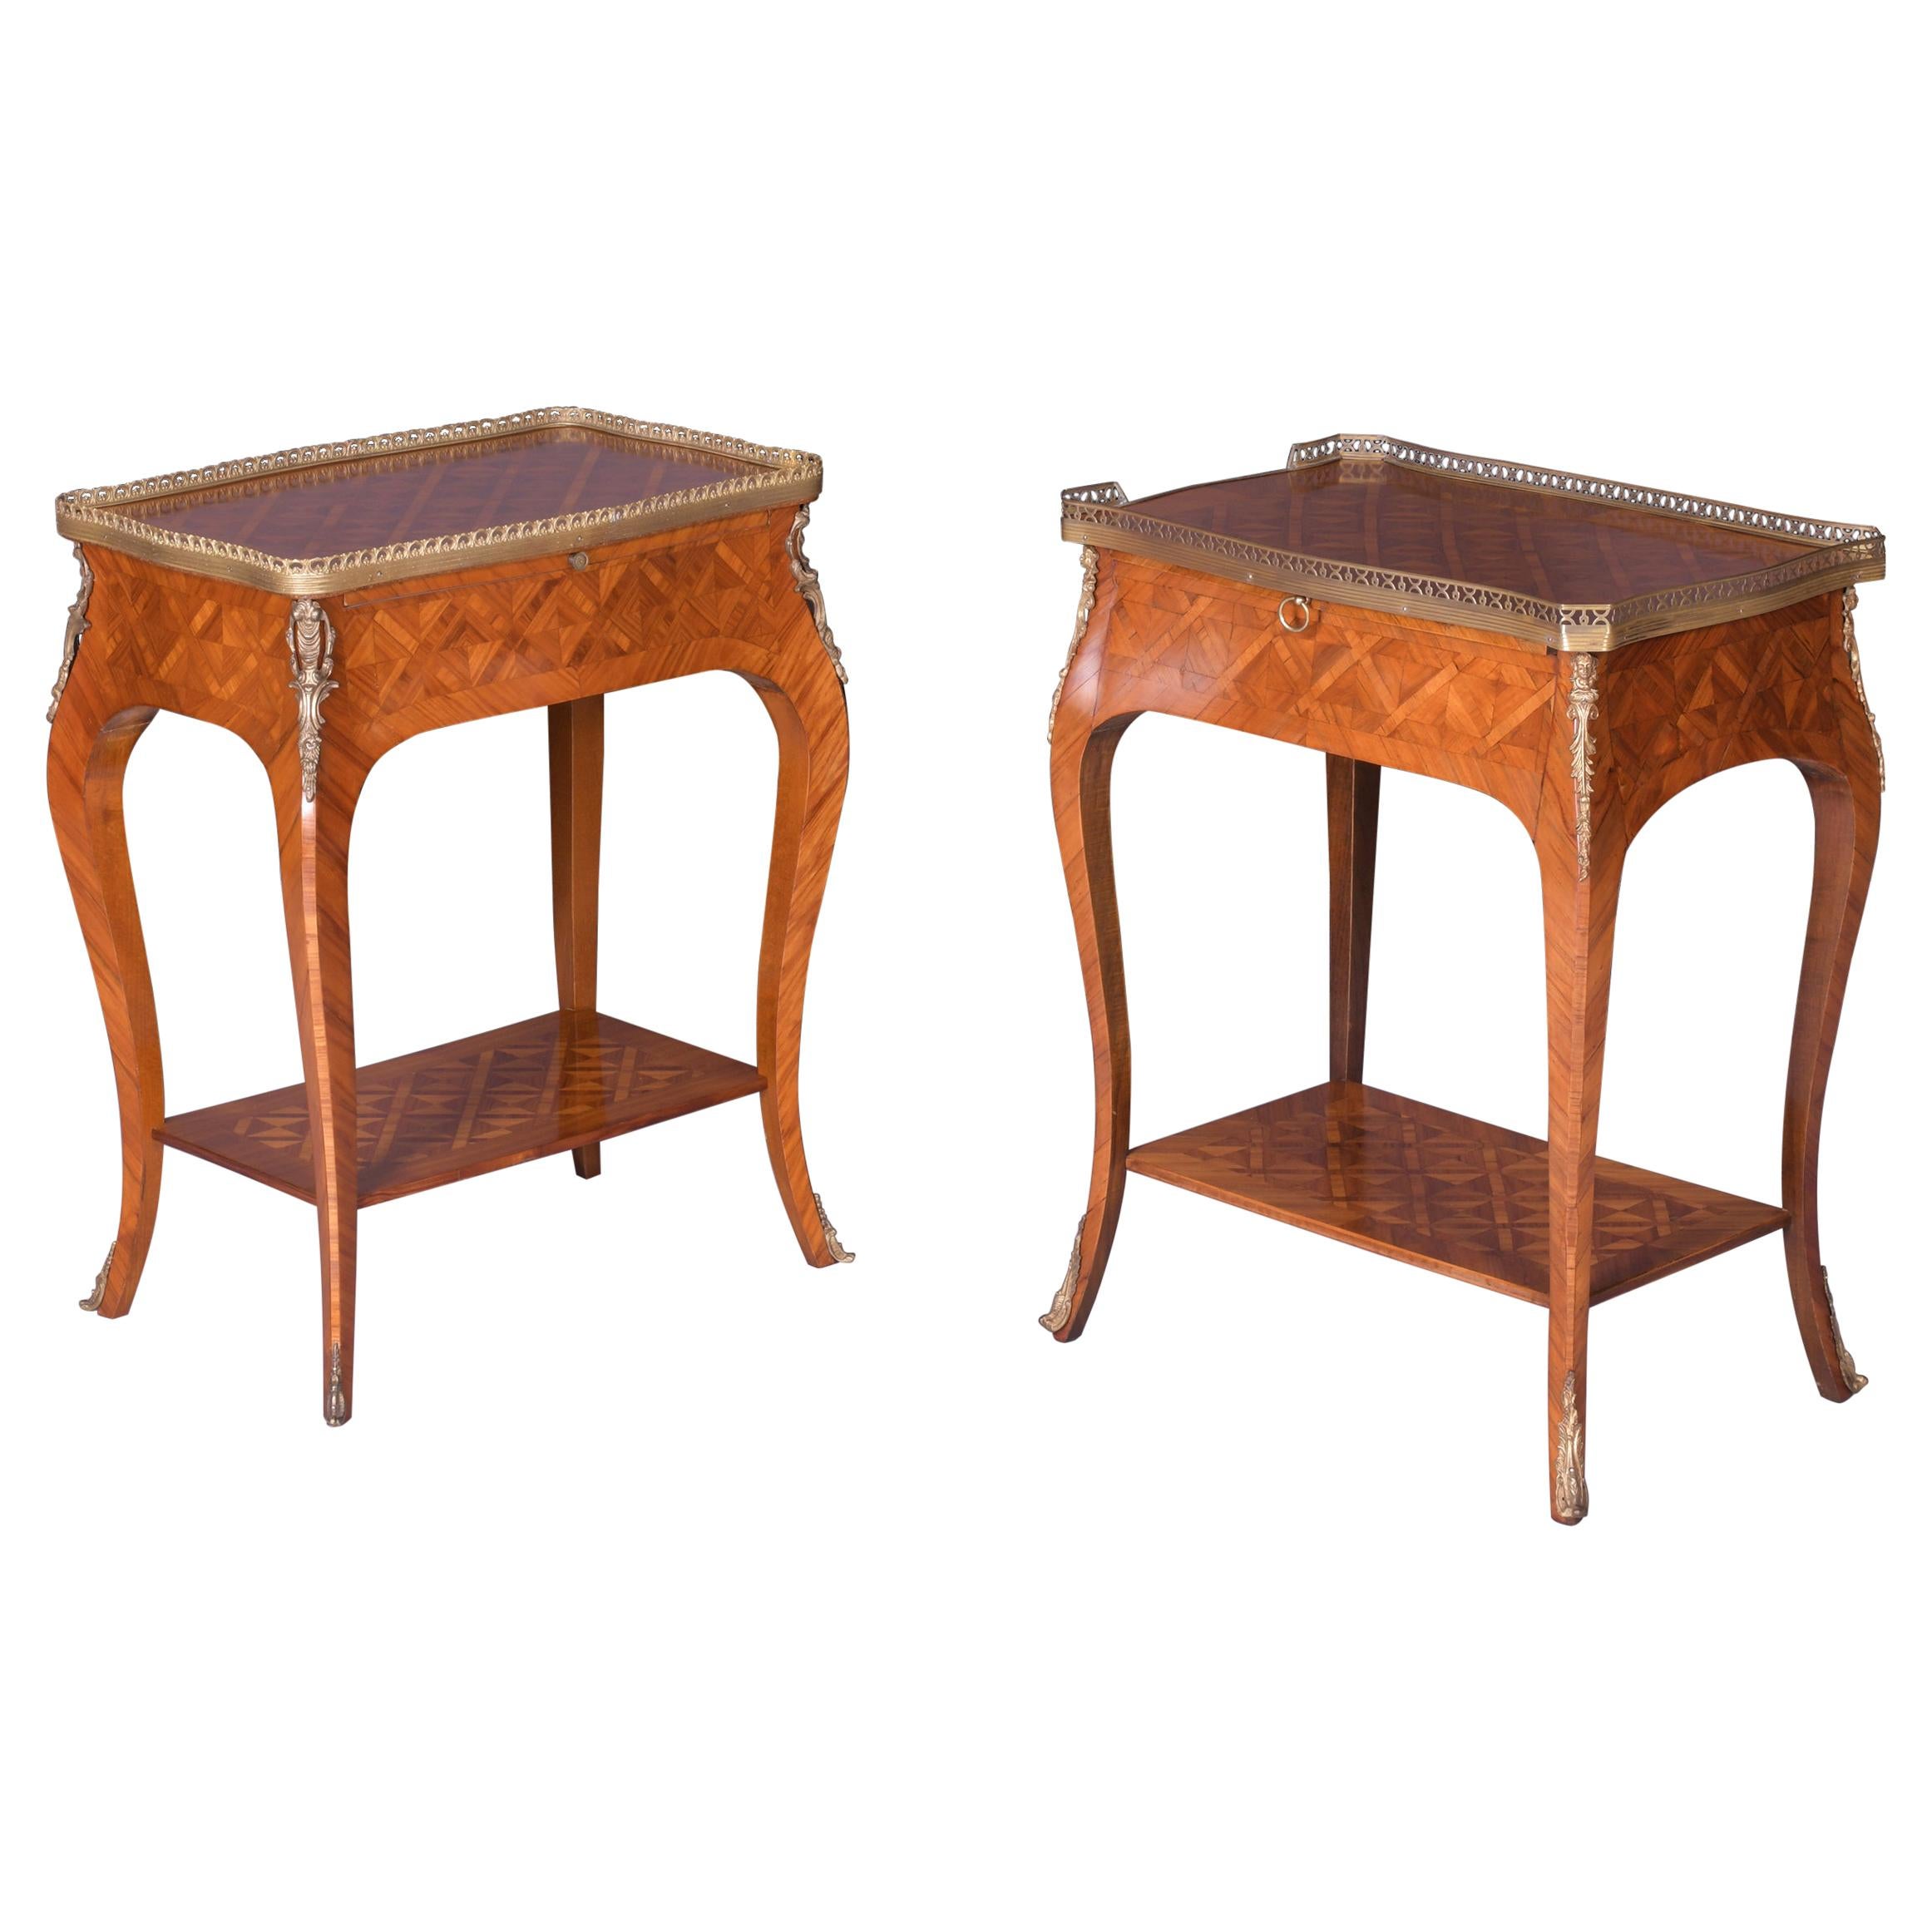 Pair of Antique Edwardian Period Kingwood Side / End Tables